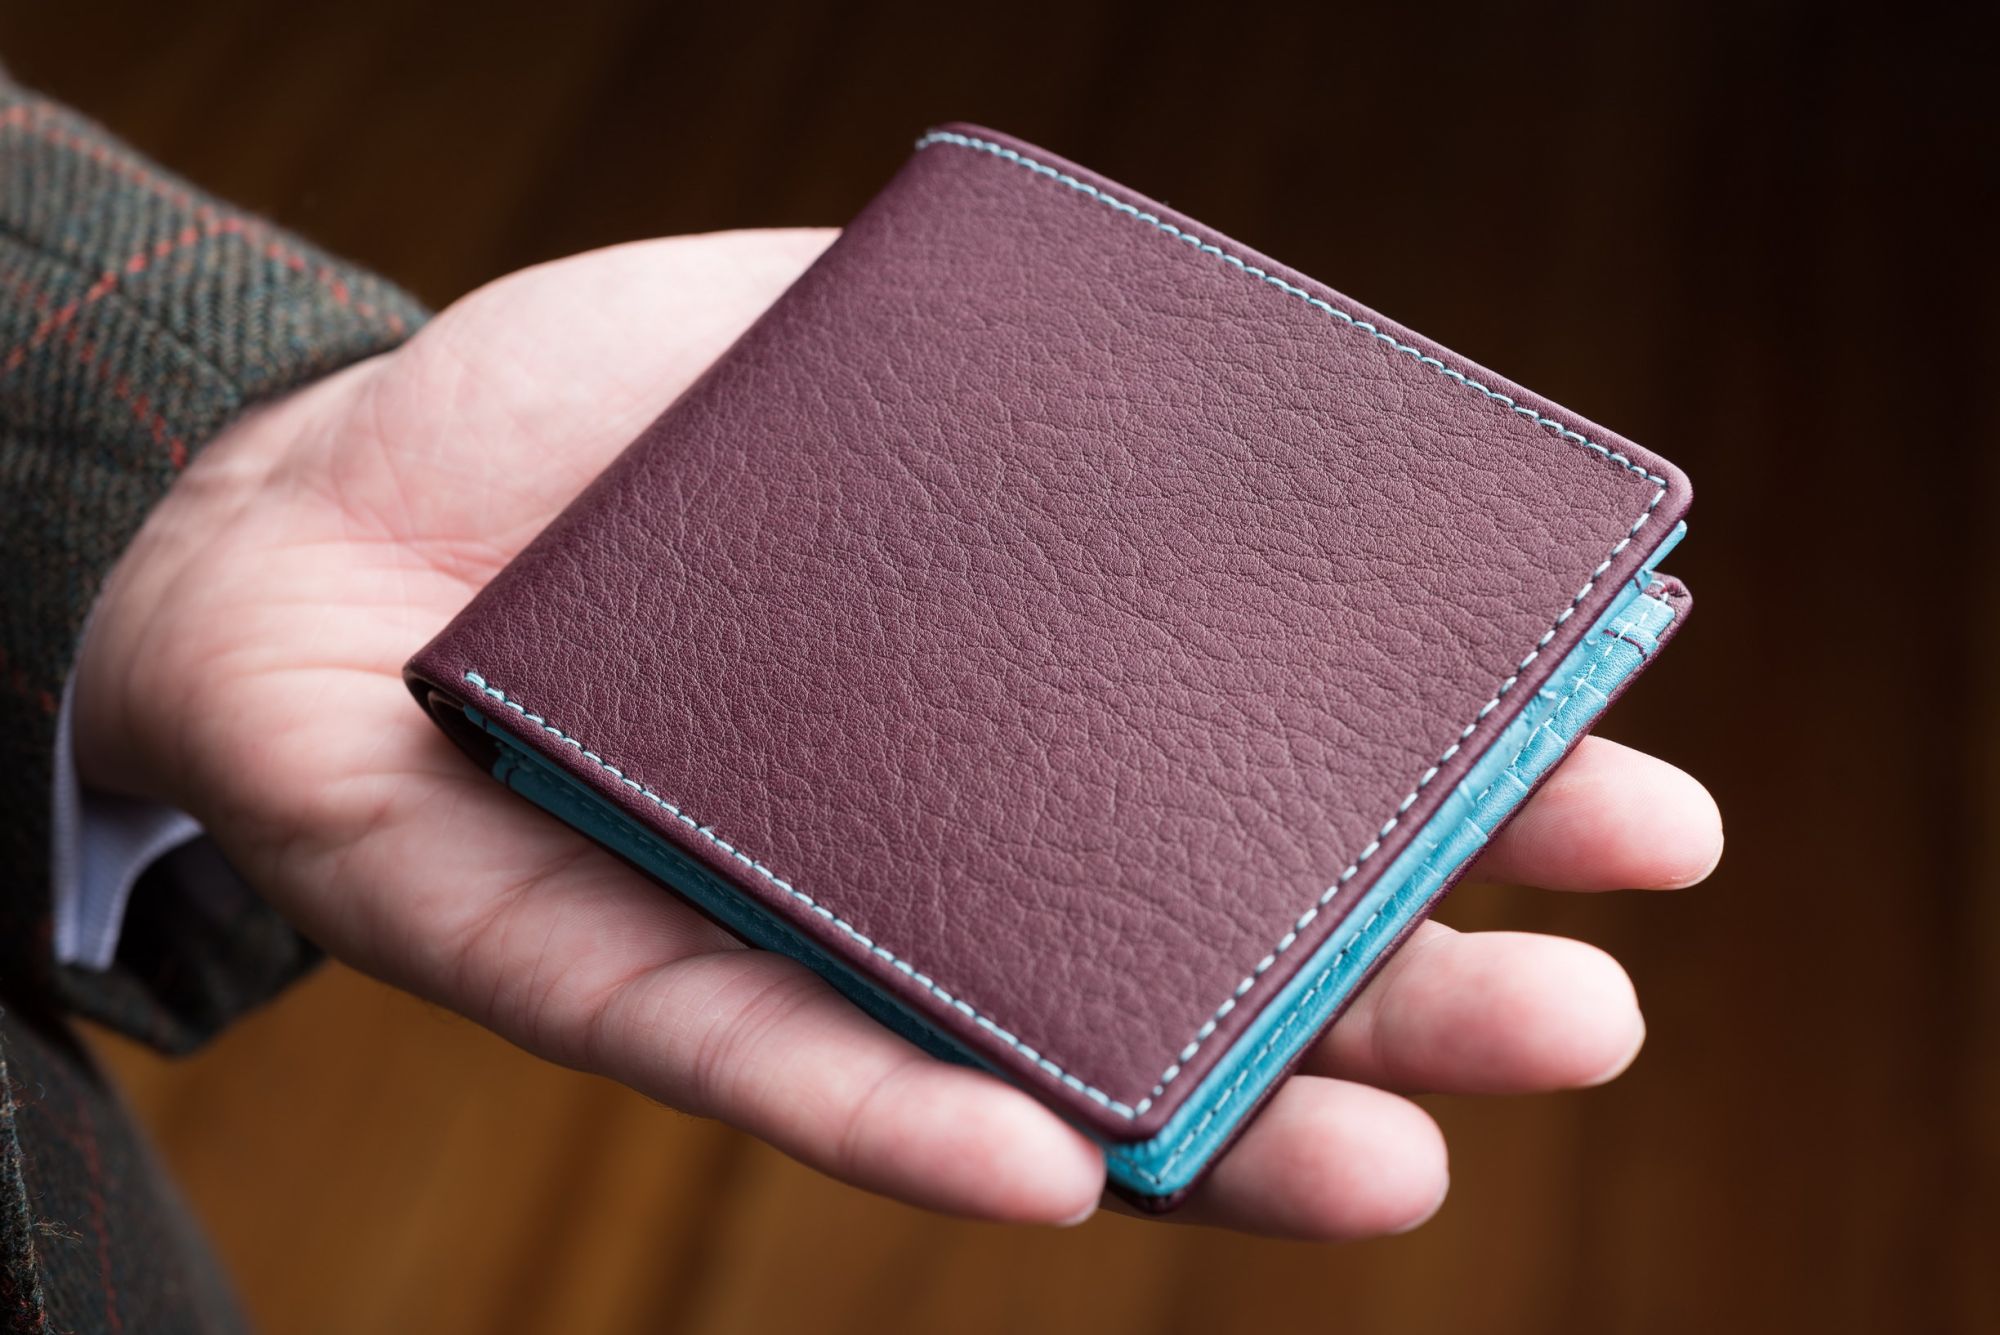 Men's Leather Wallet in Burgundy and Turquoise Deerskin with 10 Card Slots  by Fort Belvedere